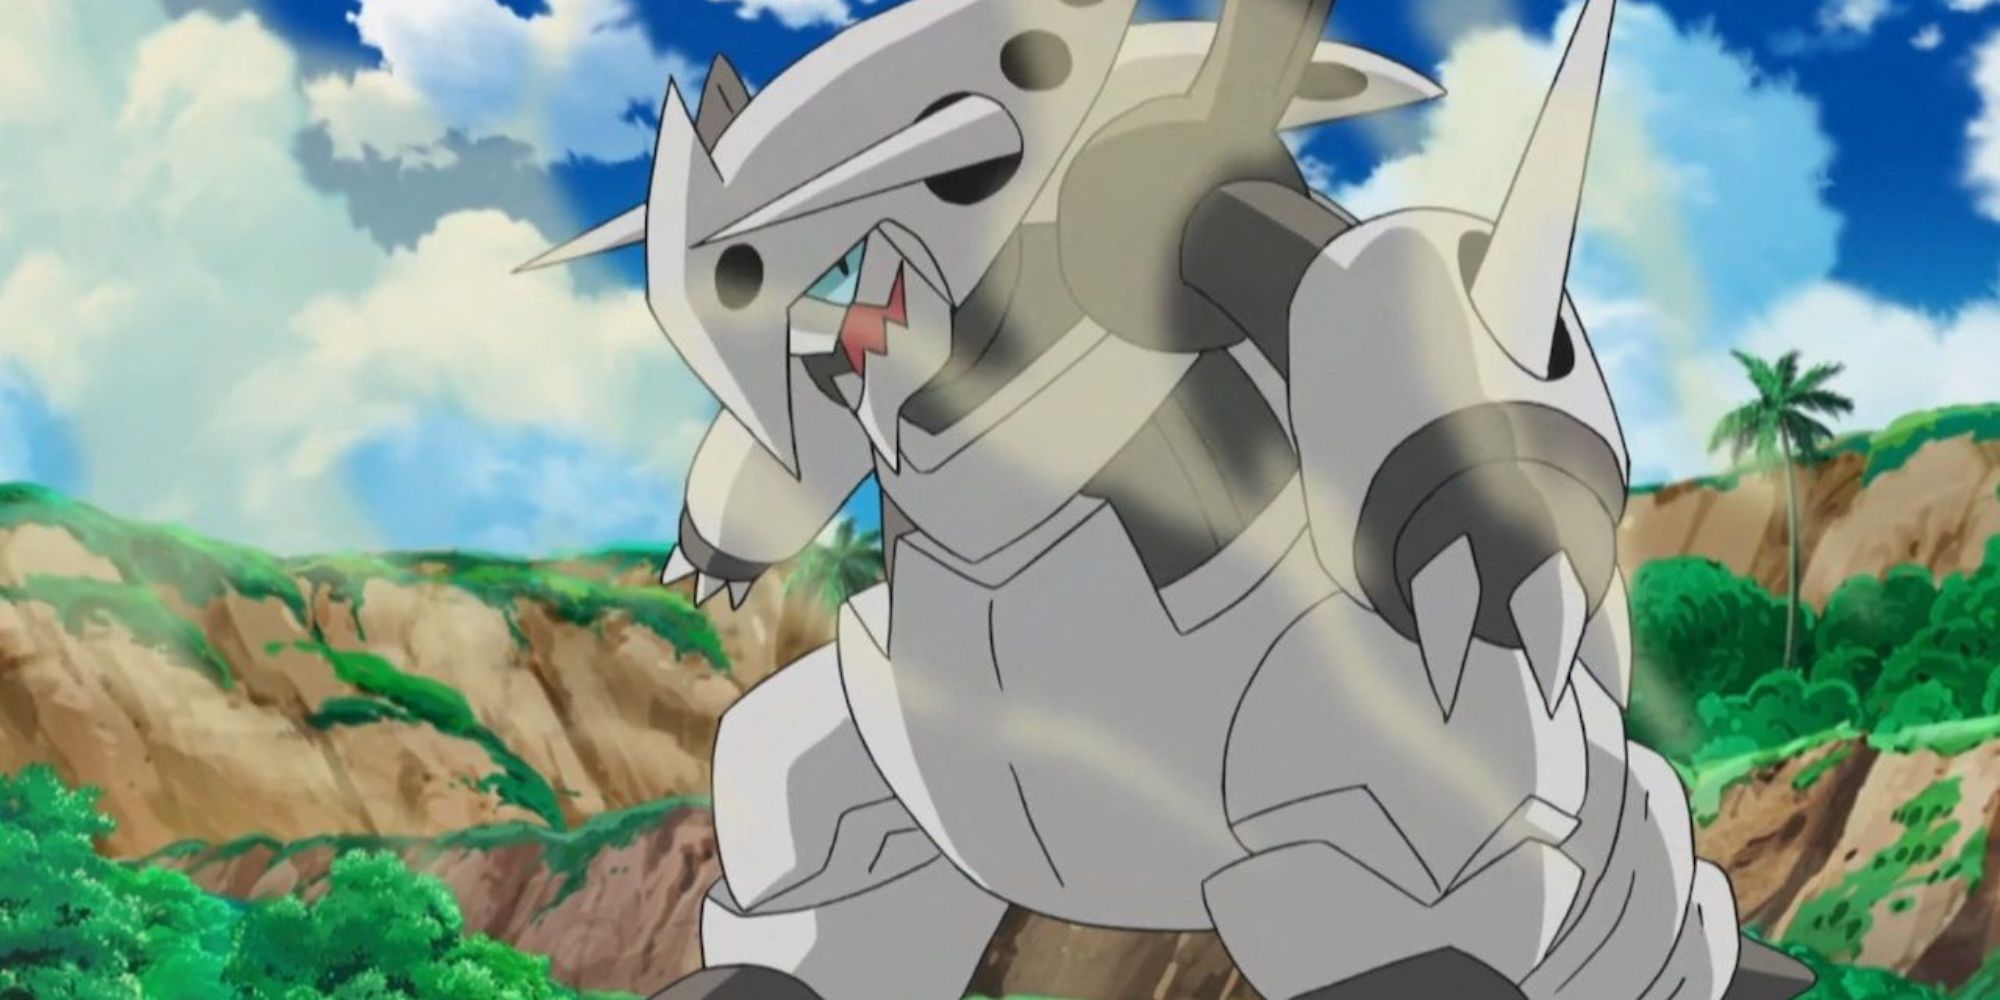 Mega Aggron stands beside a cliff in the Pokemon anime.